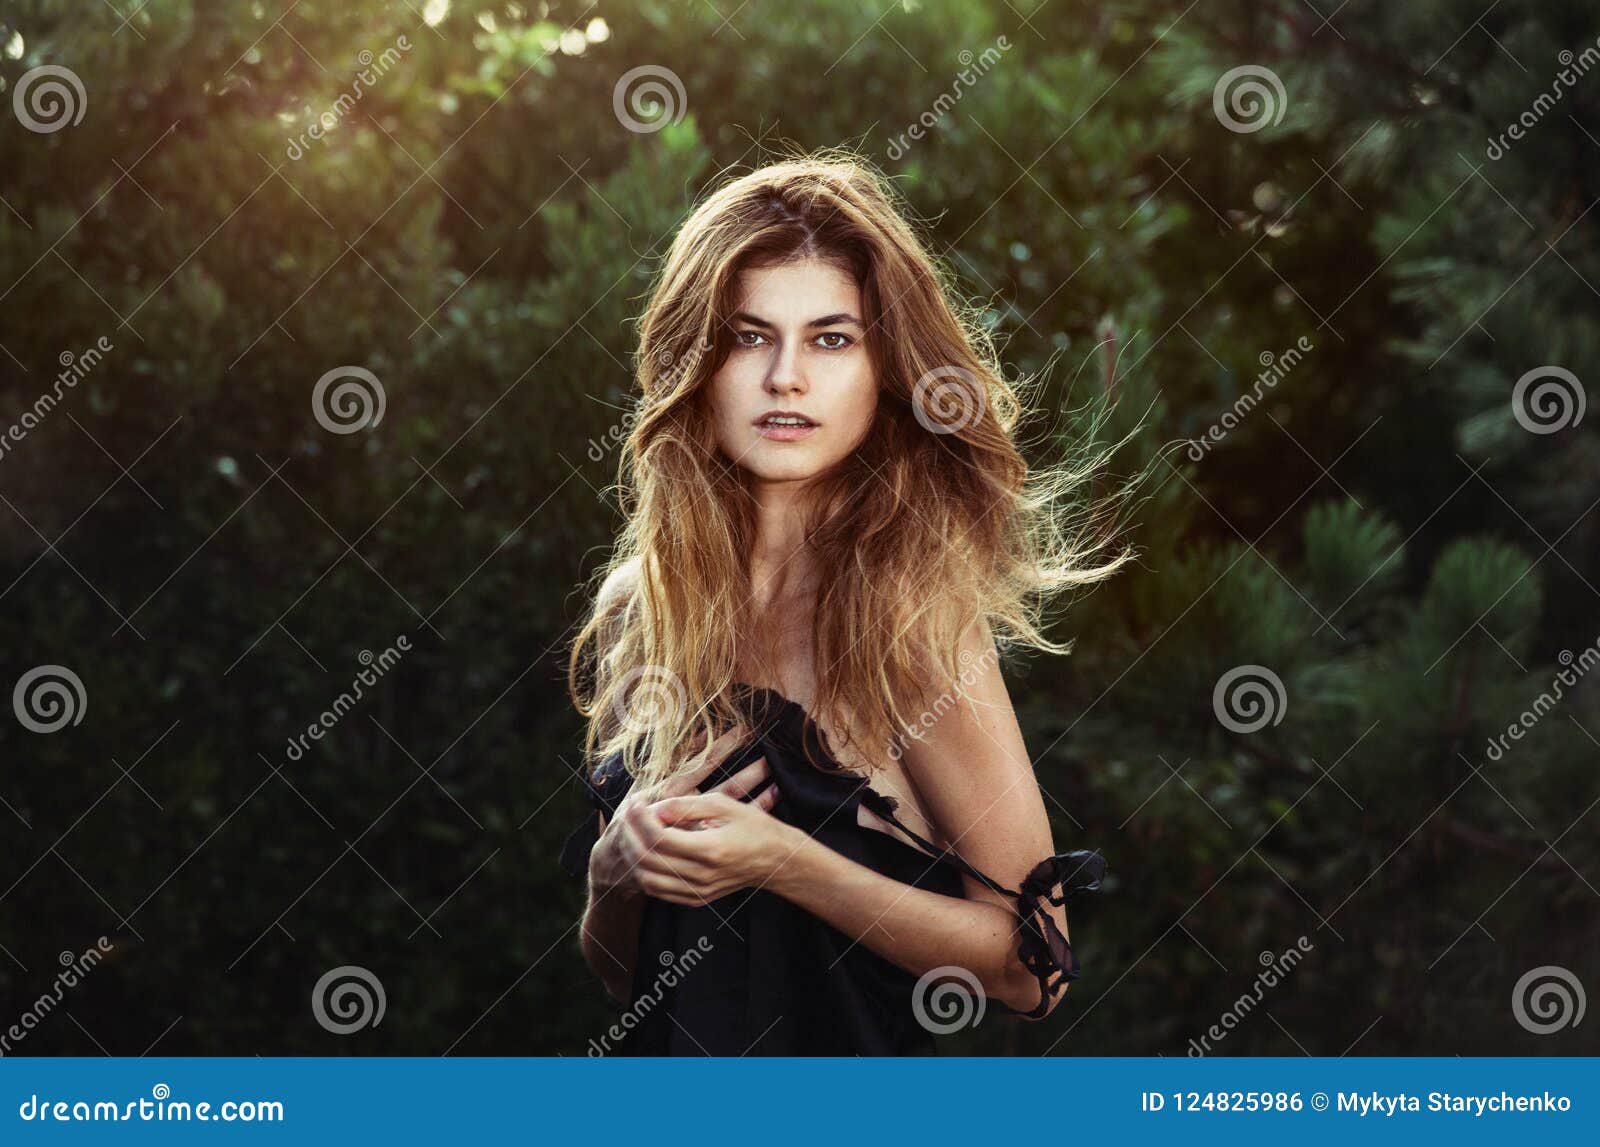 gorgeous woman with natural beauty in forest with windy long healthy hair and natural makeup